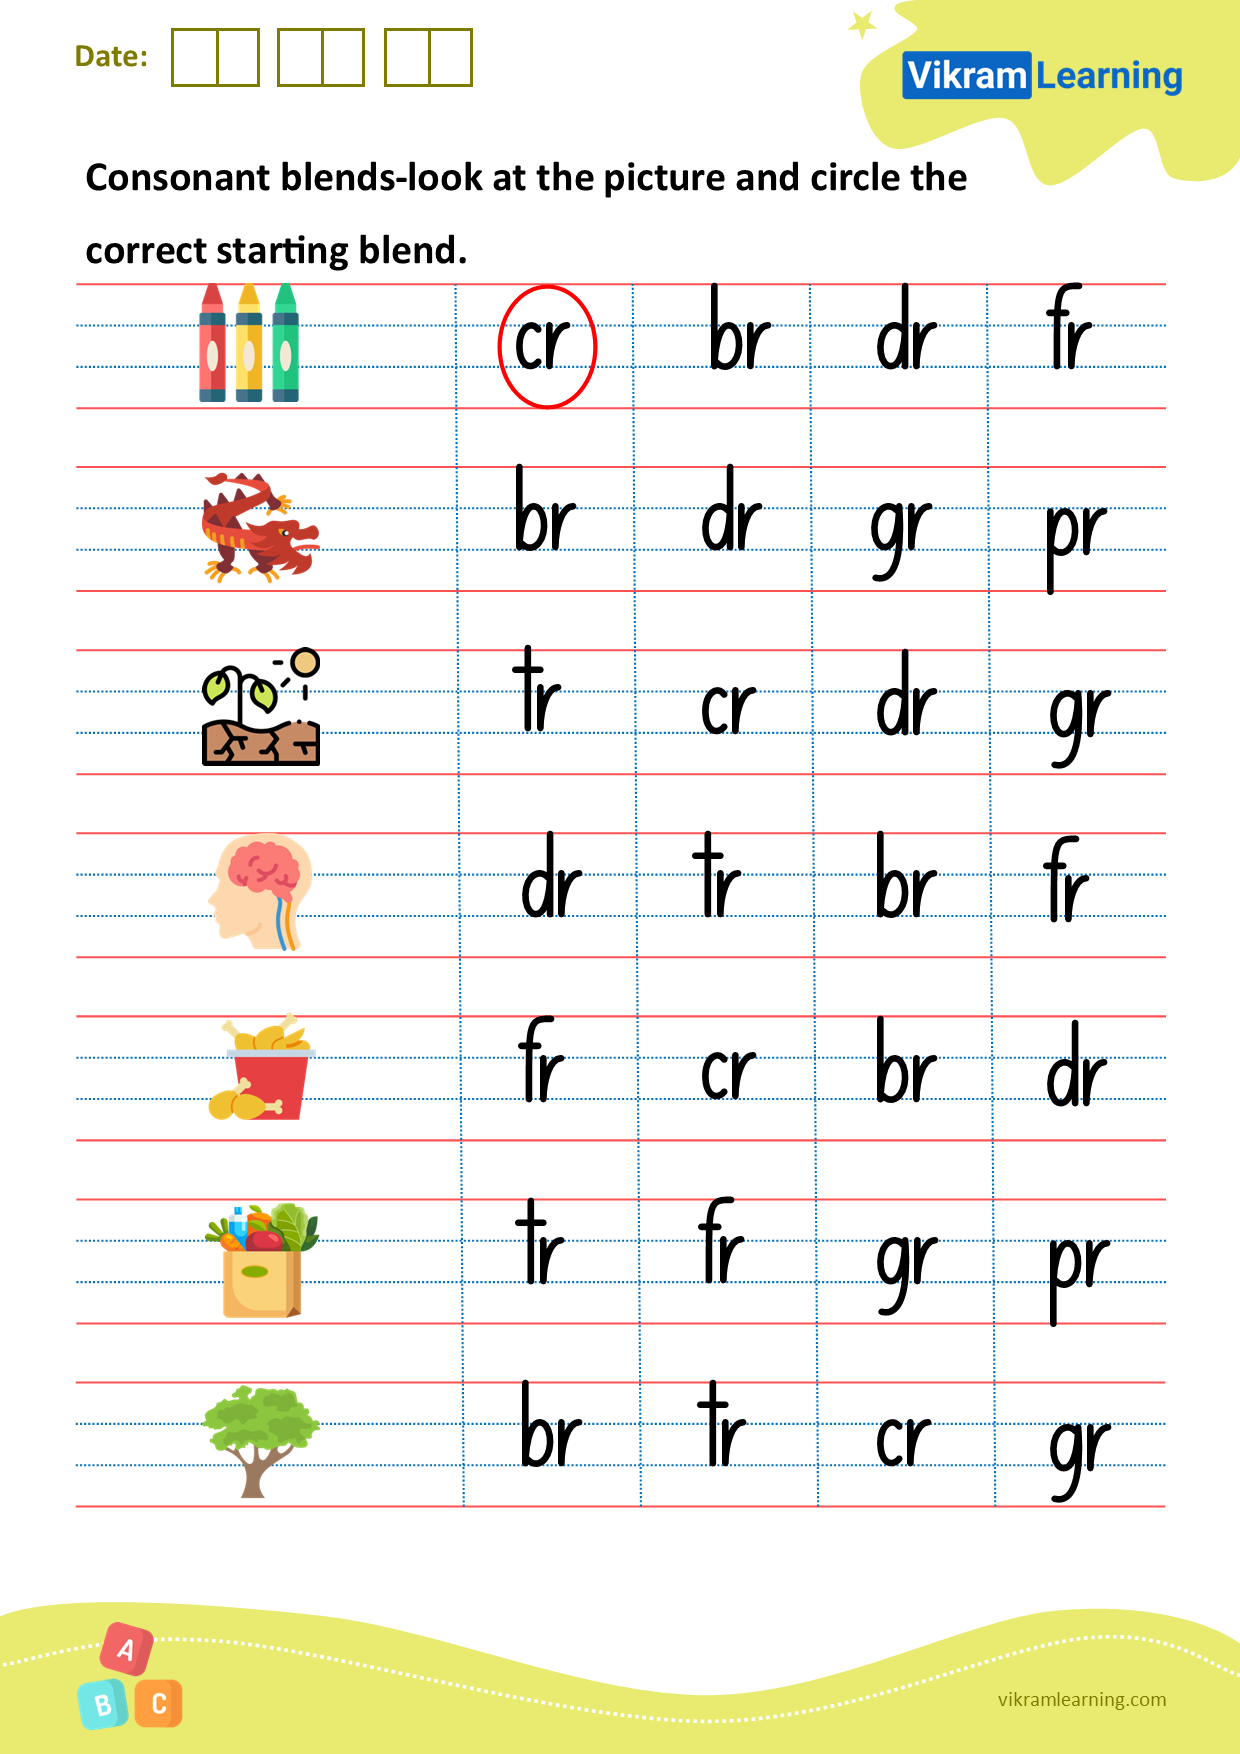 Download consonant blends-look at the picture and circle the correct starting blend worksheets